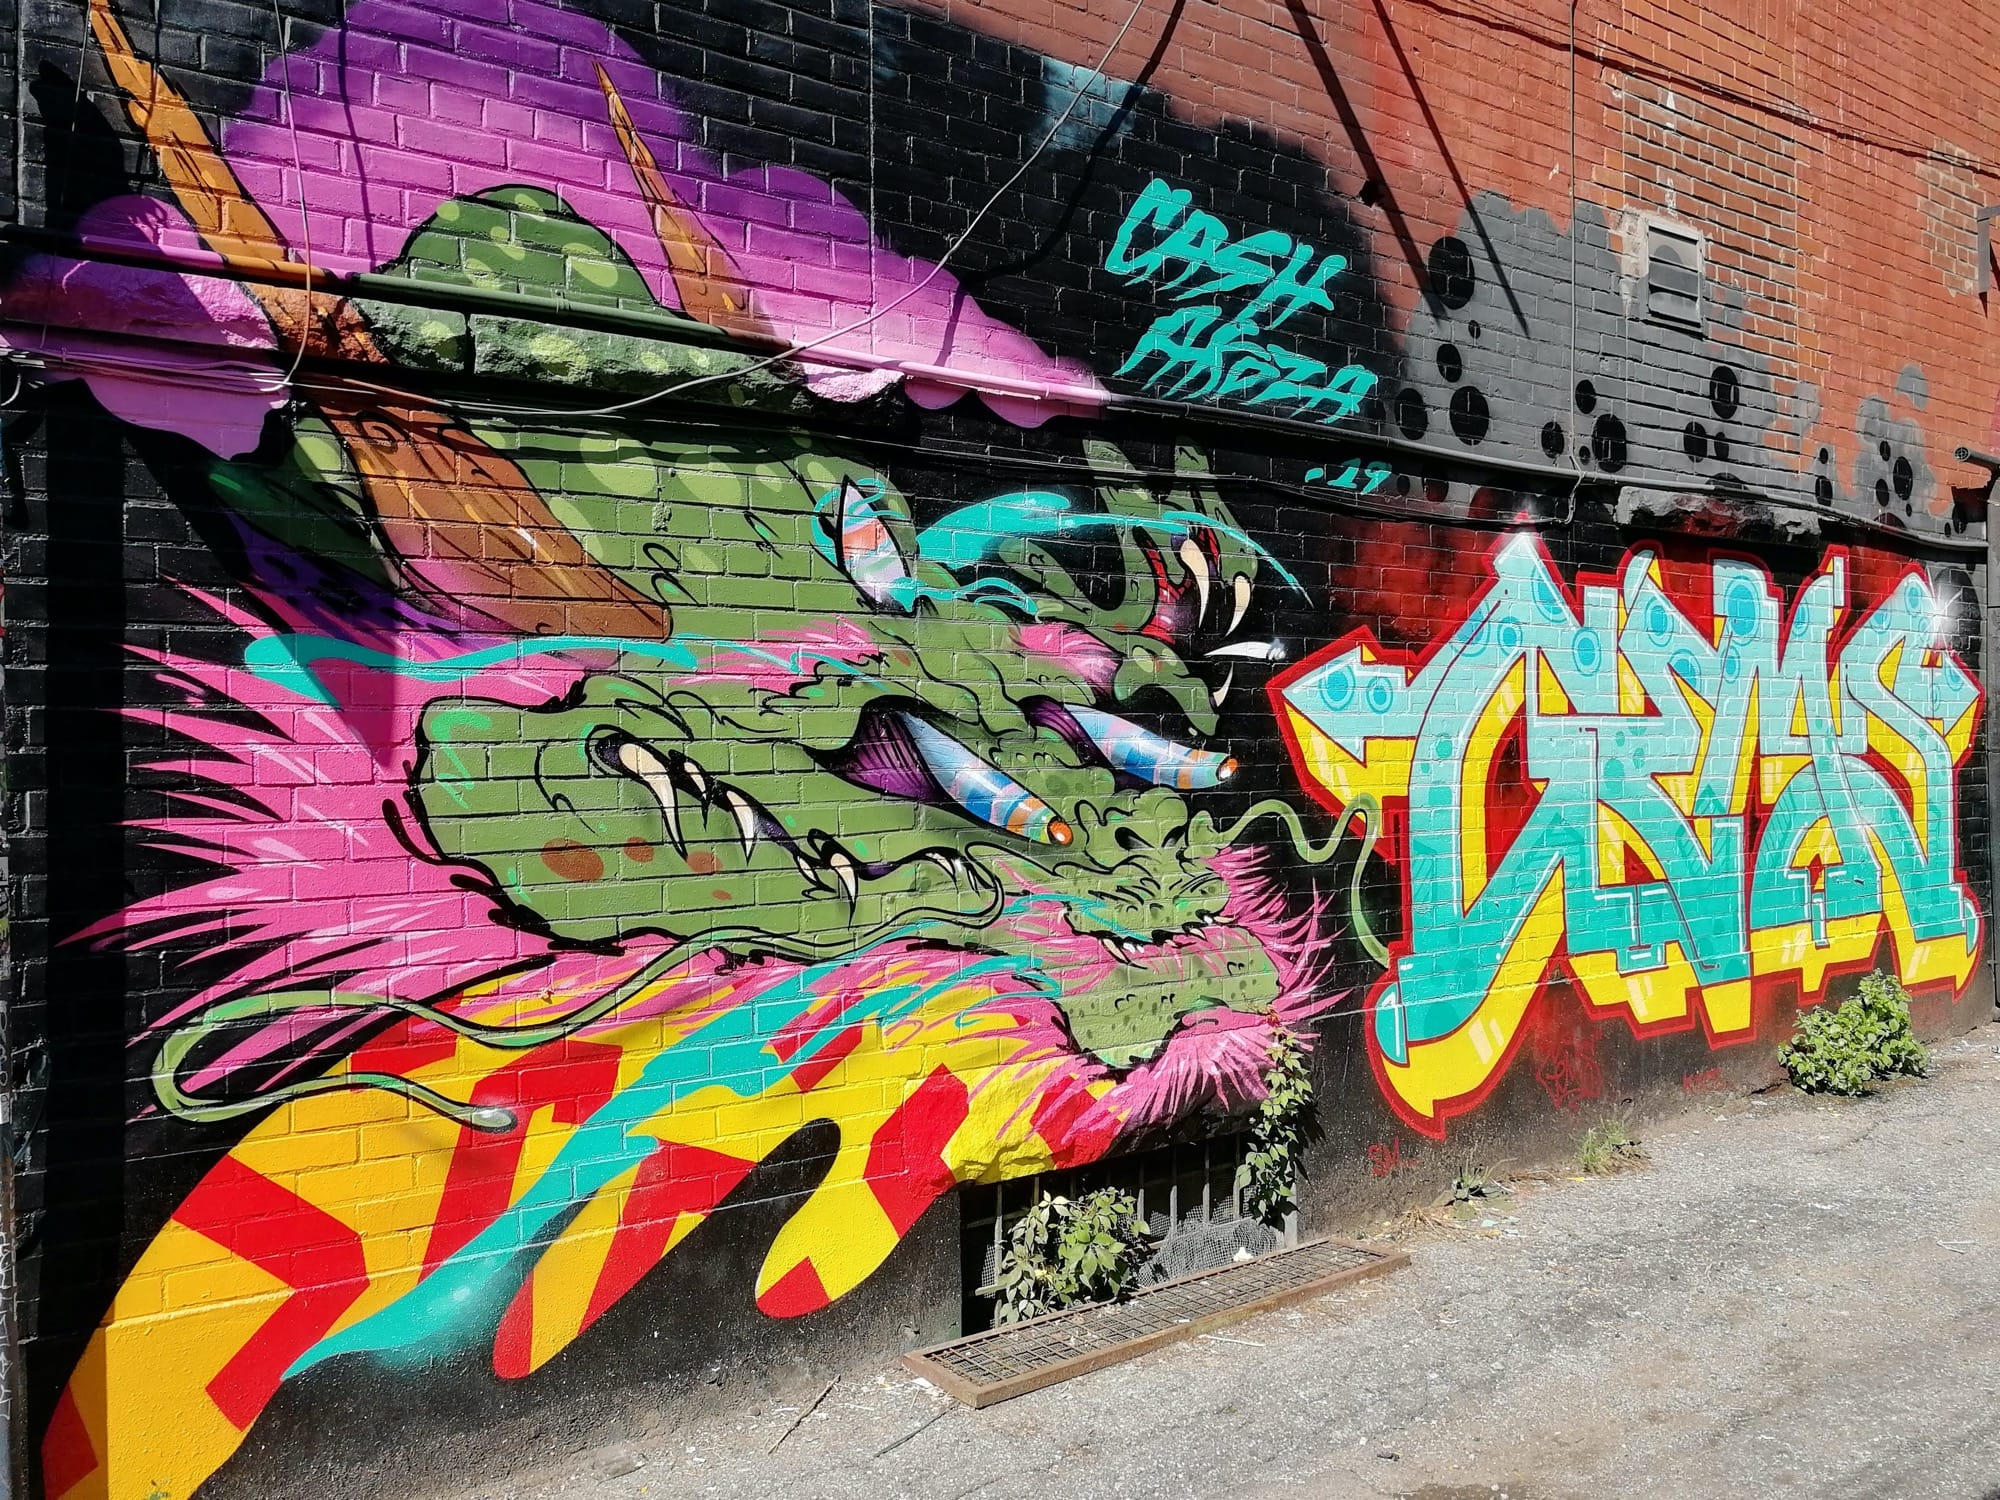 Graffiti 2511  captured by Rabot in Toronto Canada